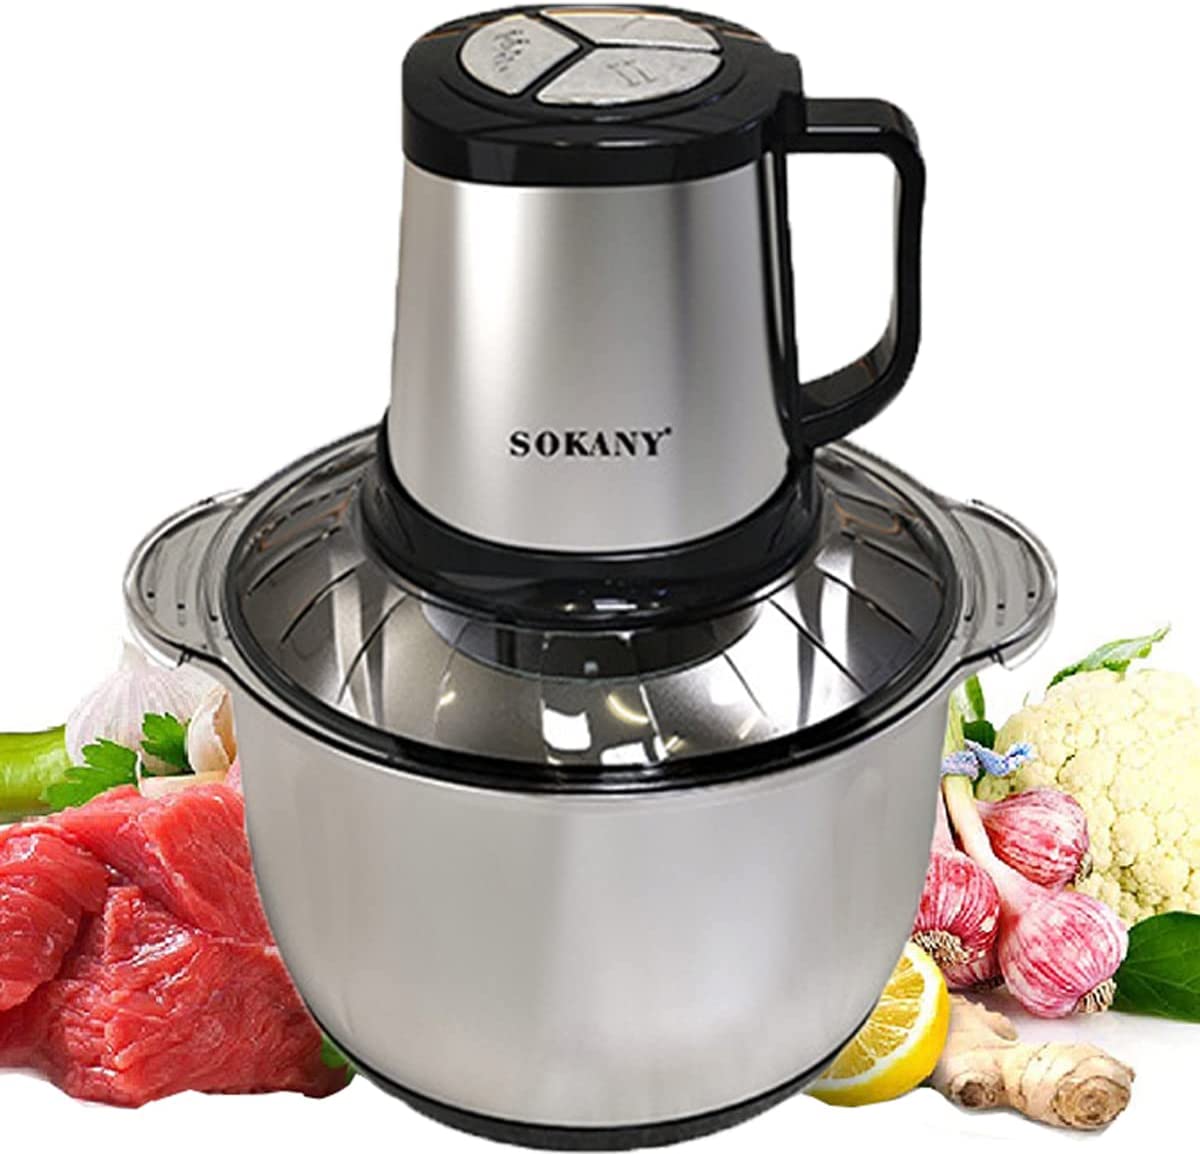 SOKANY Kitchen Electric Multi-Chopper Meat Grinder with 4 Blades for Meat, Onions, Fruit, Vegetables (SK-7015, 800W, 5L)